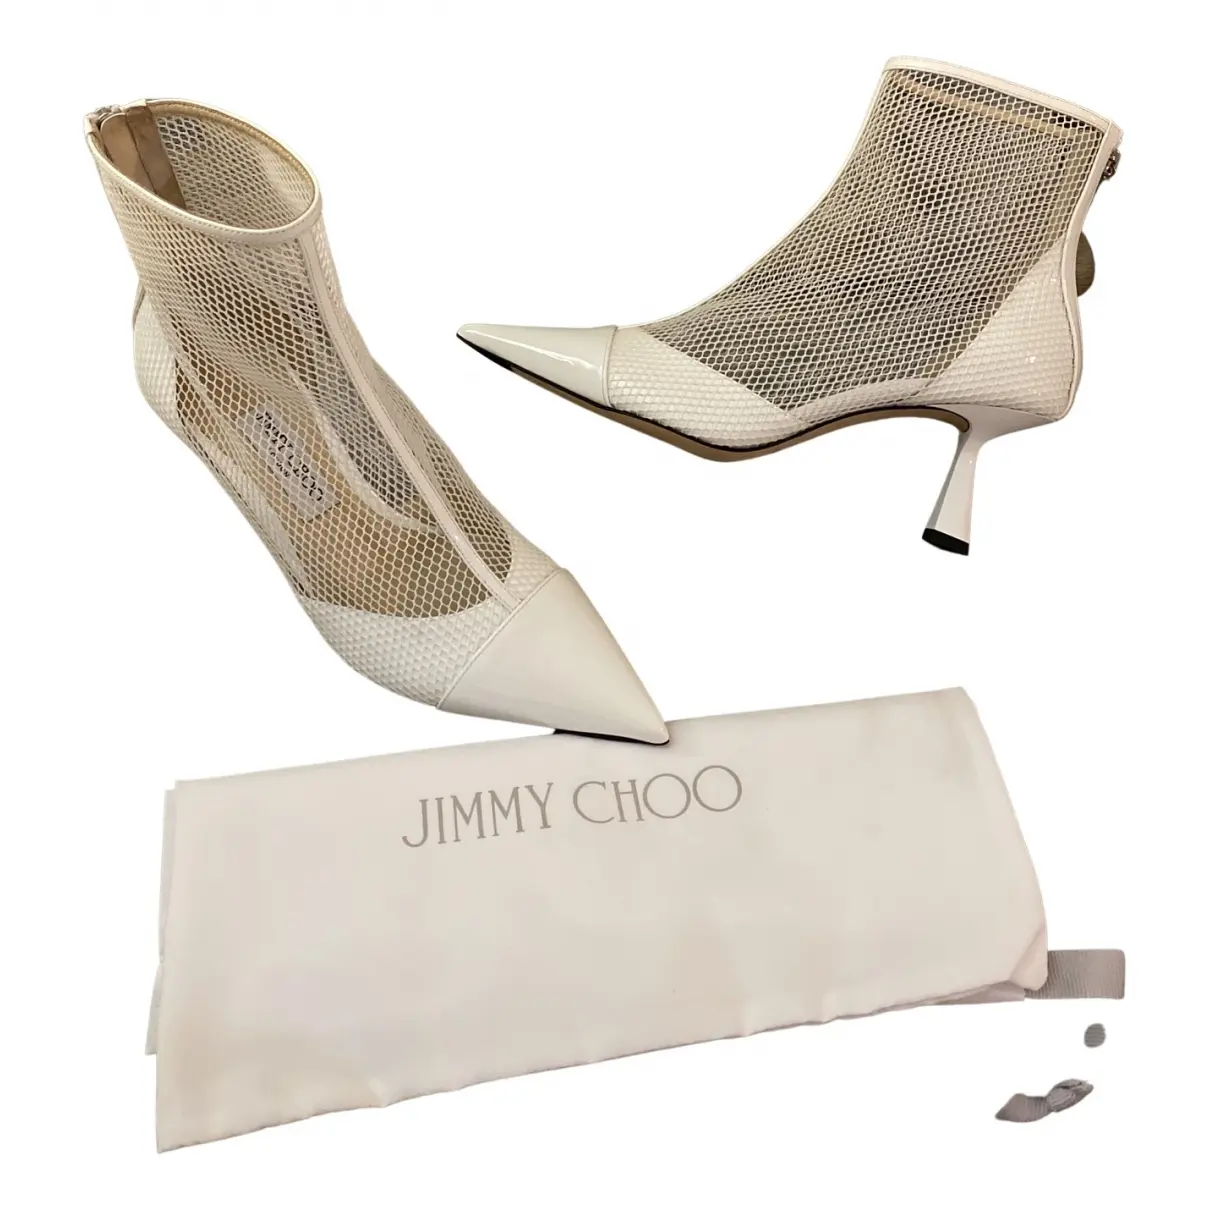 Buy Jimmy Choo Patent leather ankle boots online